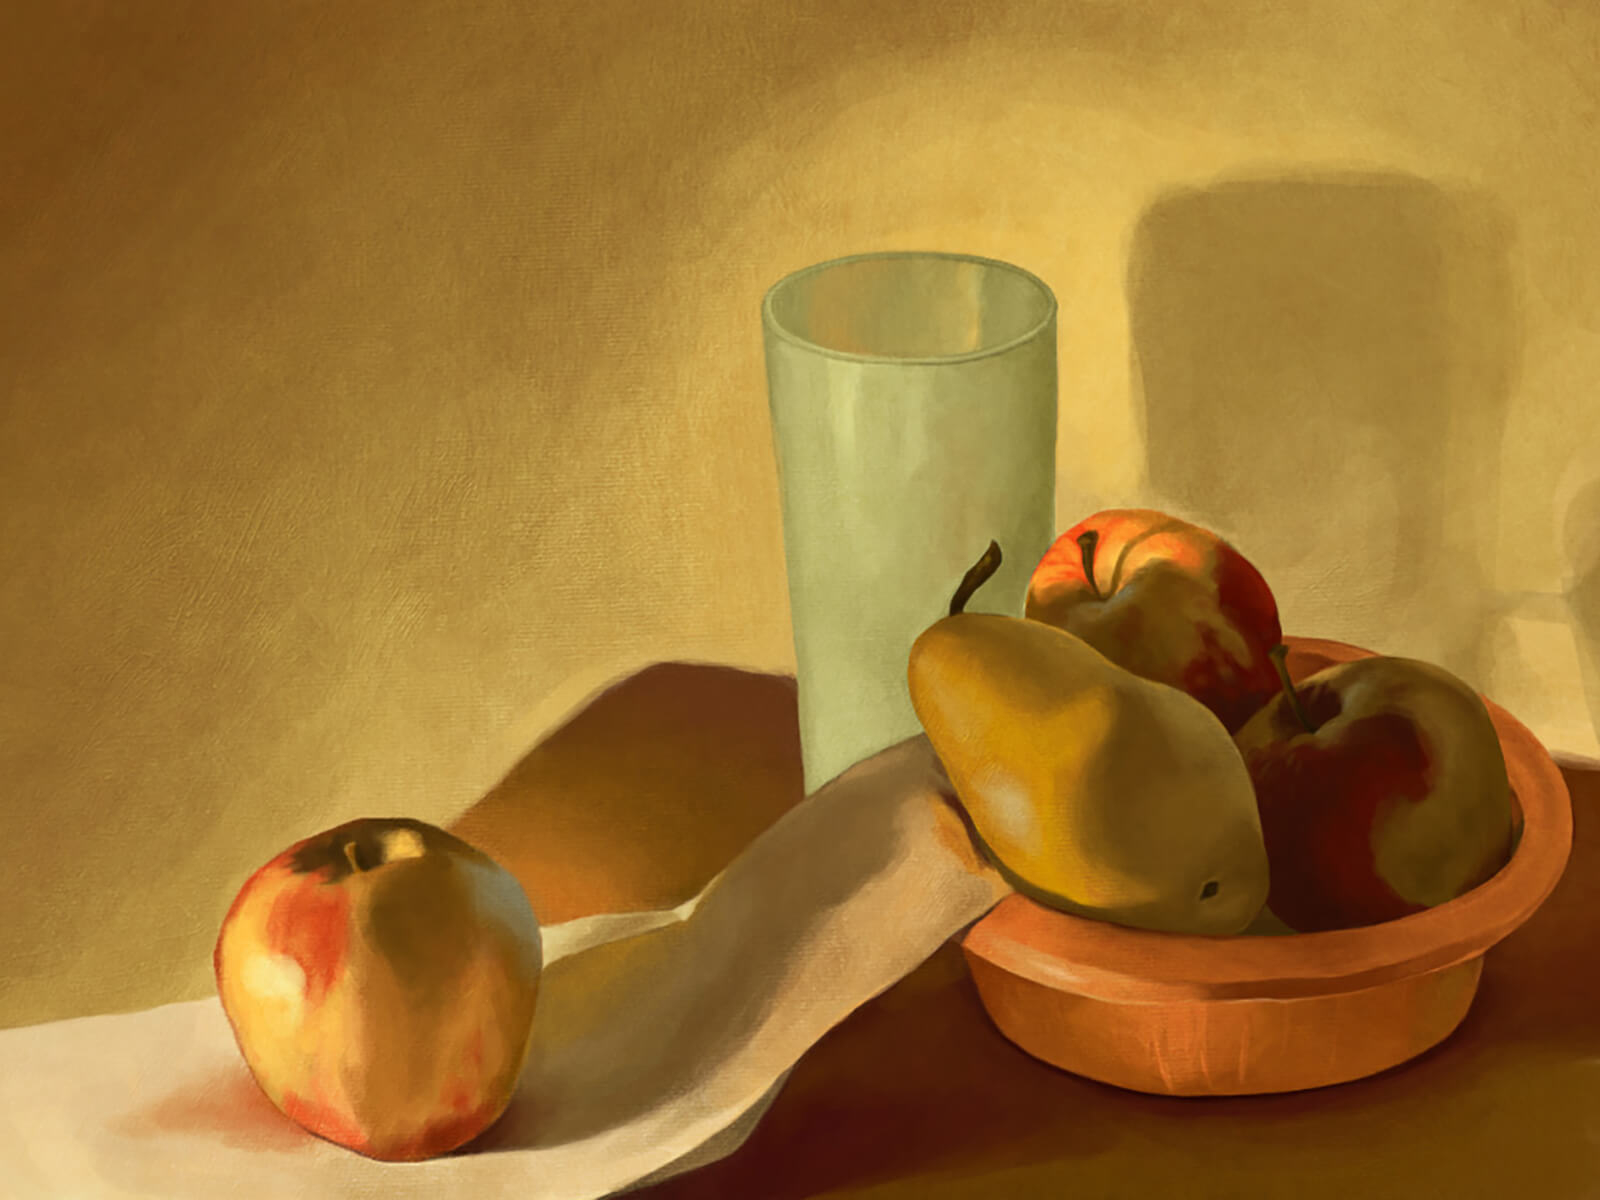 still-life traditional painting of bowl with apples and a pear, a glass, and another apple on a draped white napkin